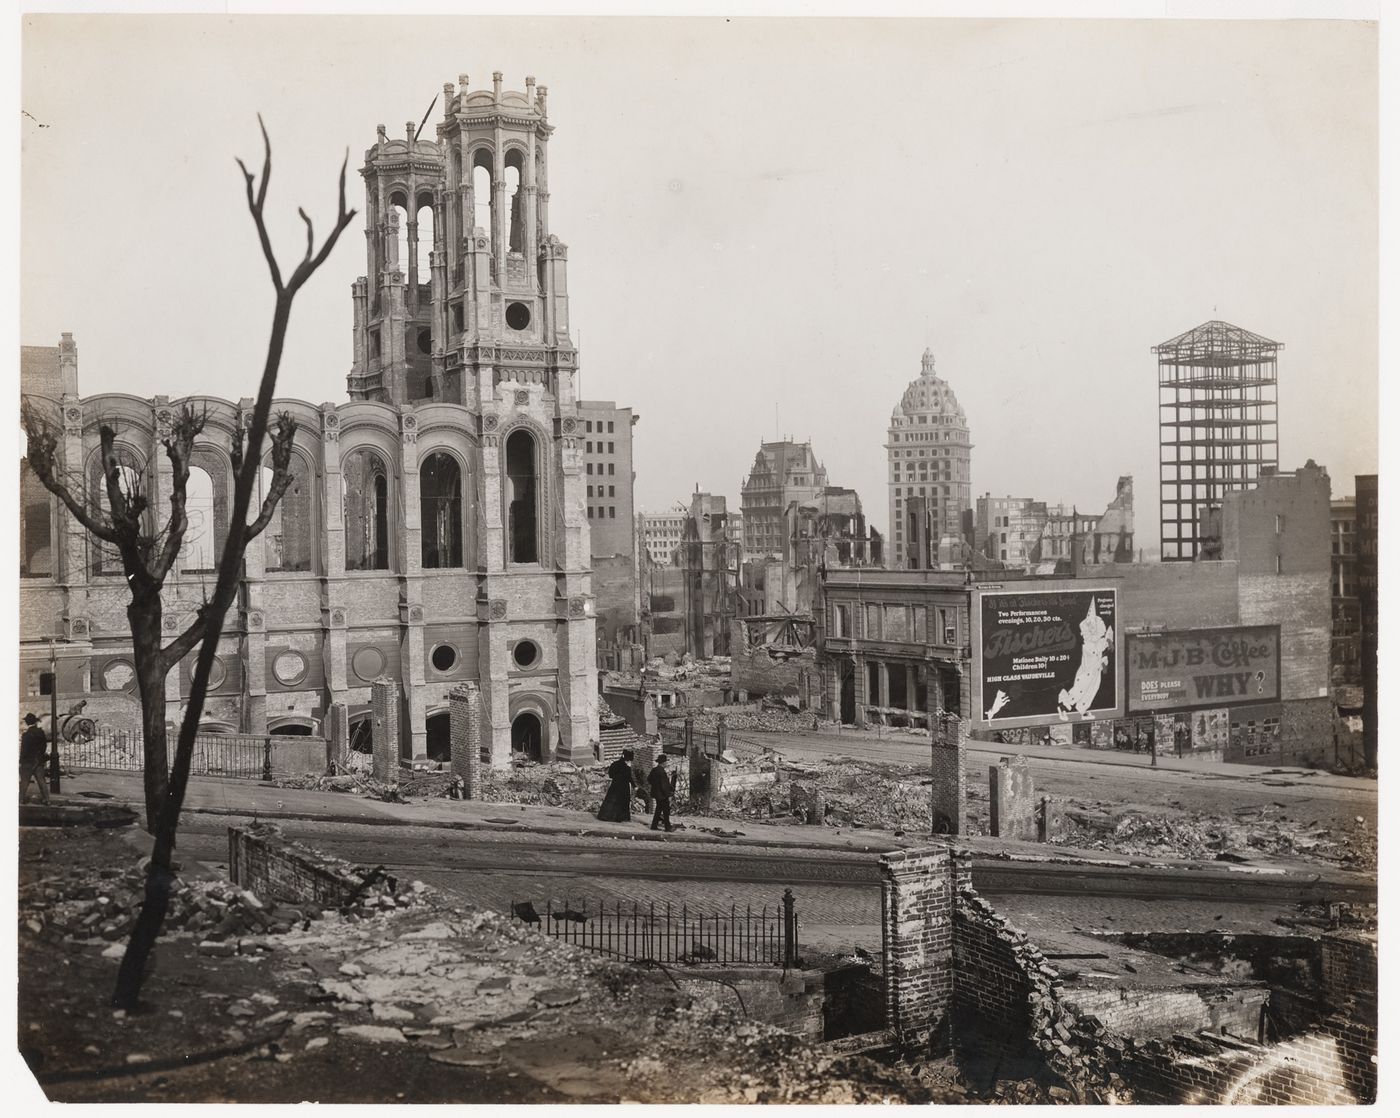 General view of the aftermath of the 1906 earthquake and fire, looking toward Temple Emanu-El at Powell and Bush streets, San Francisco, California